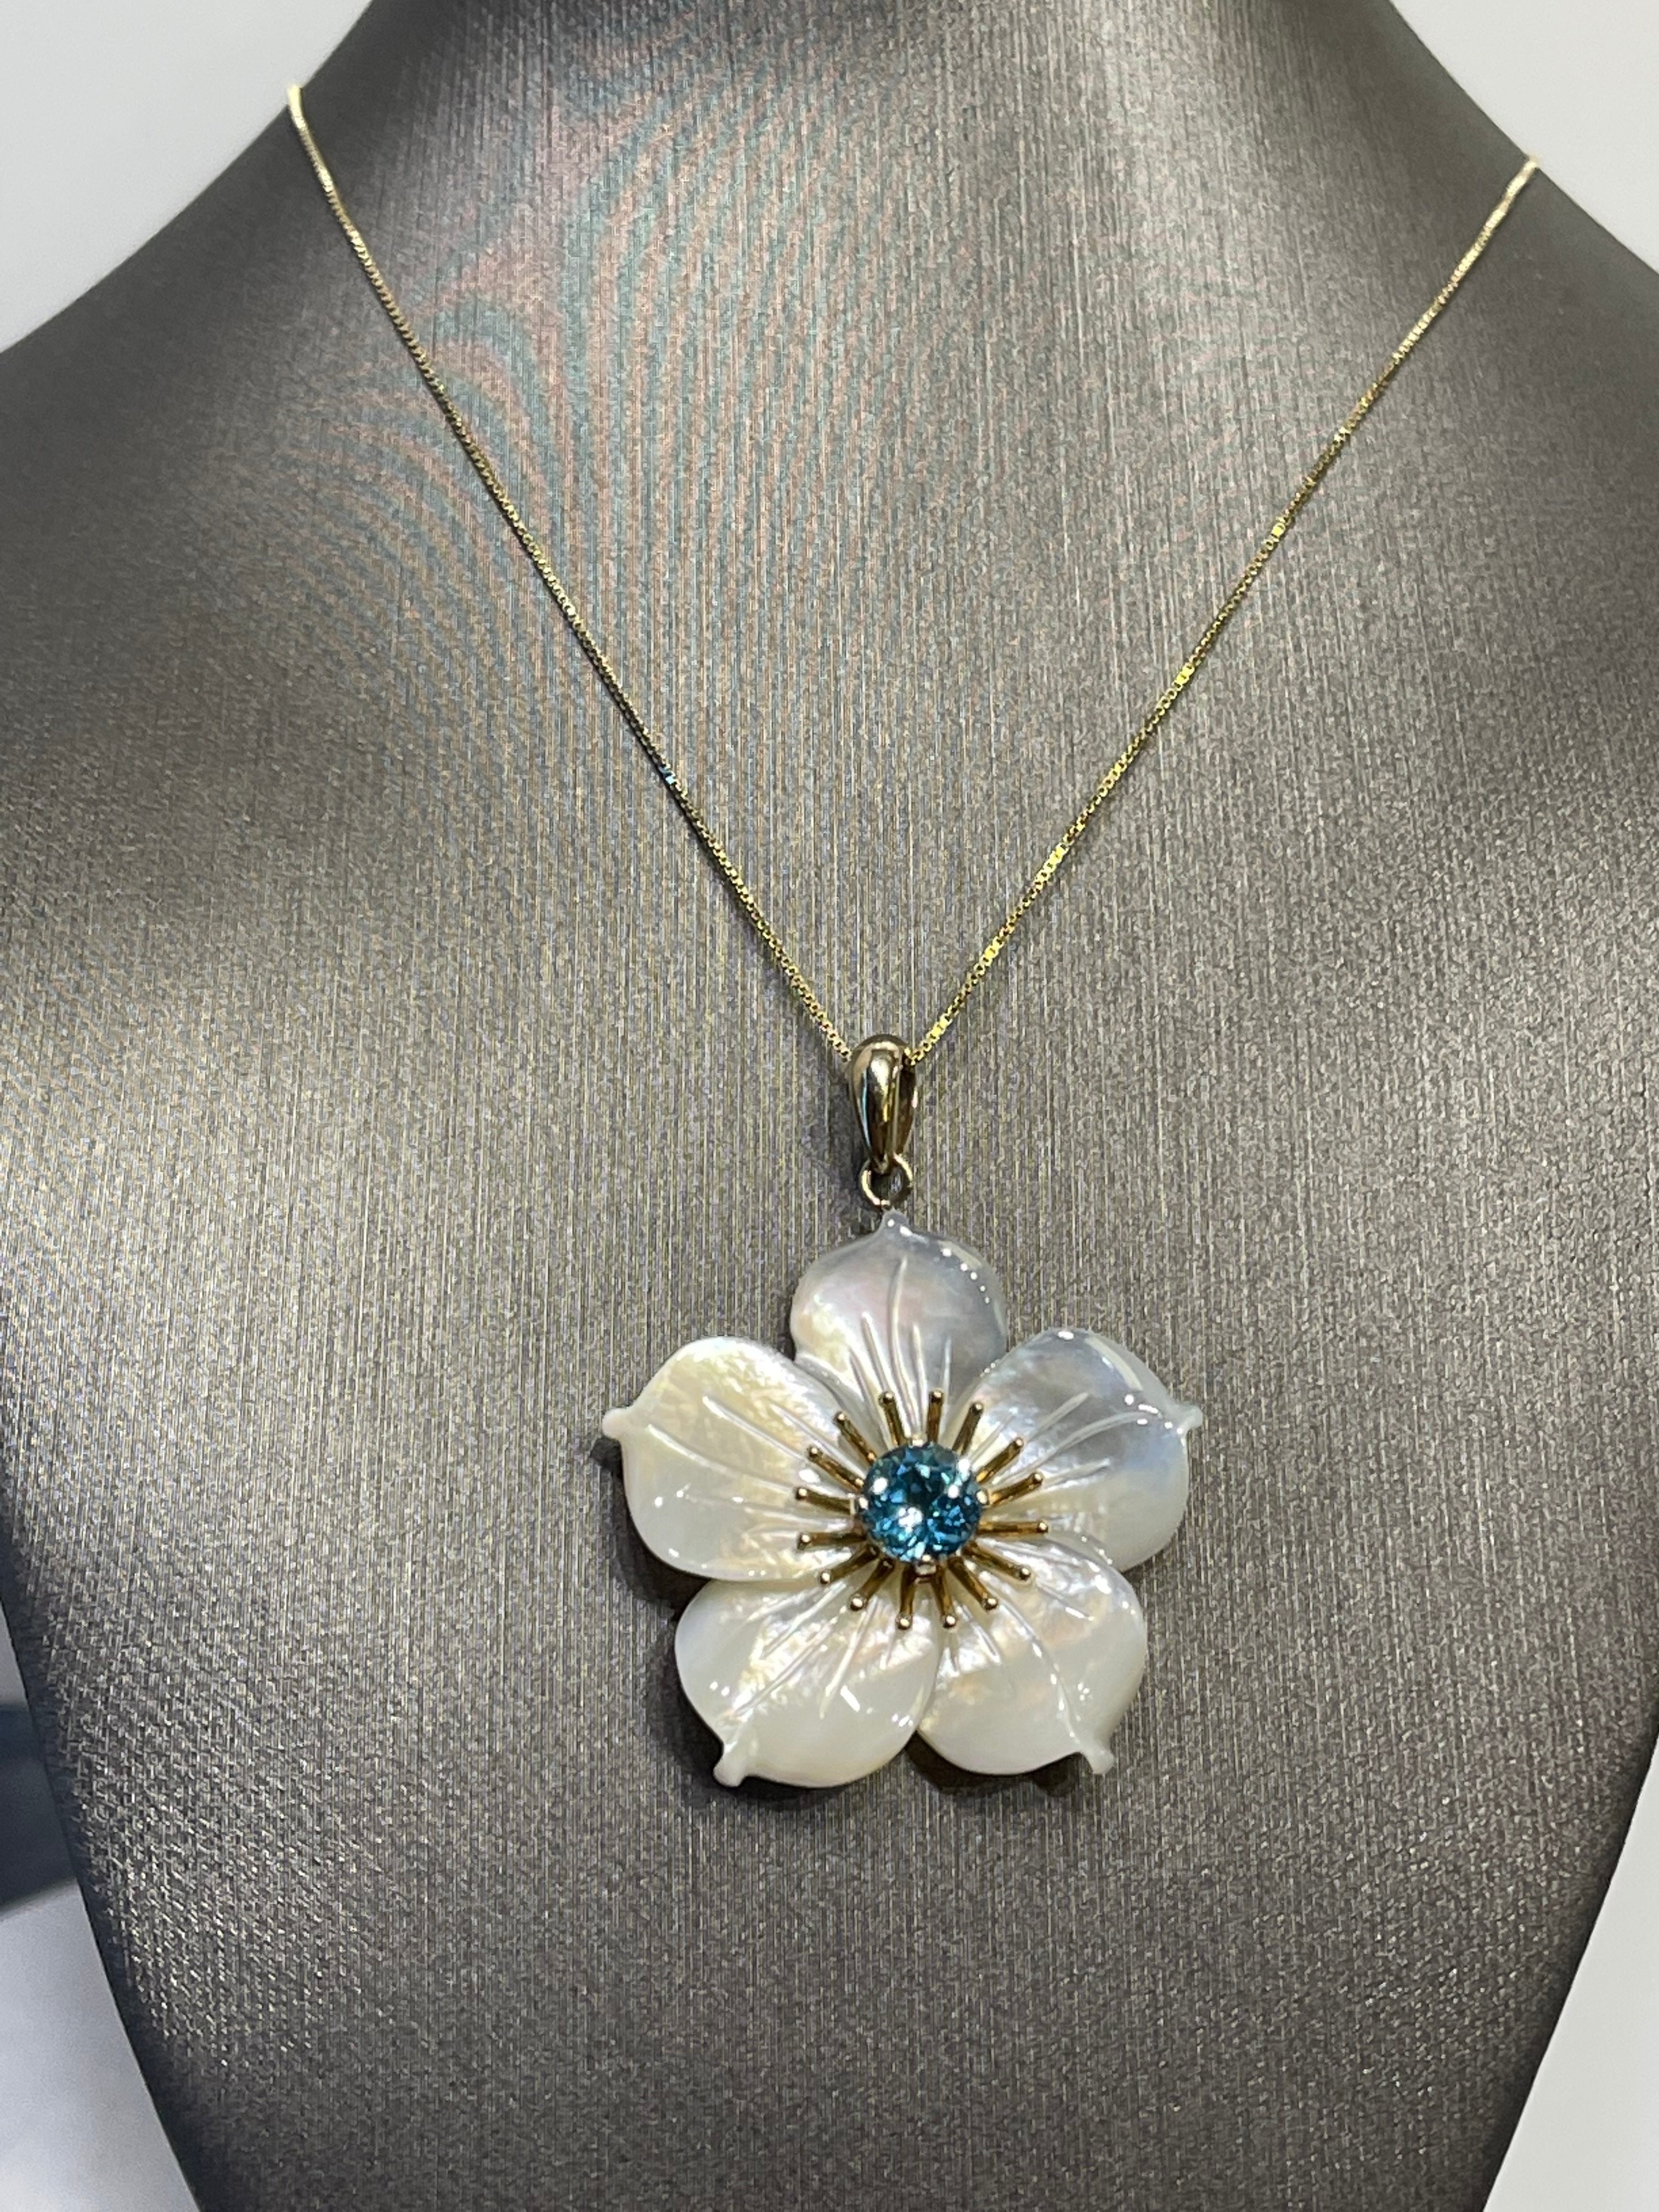 Solitary flower pendant necklace - Simple orchid bridal necklace - Style  #2420 | Twigs & Honey ®, LLC